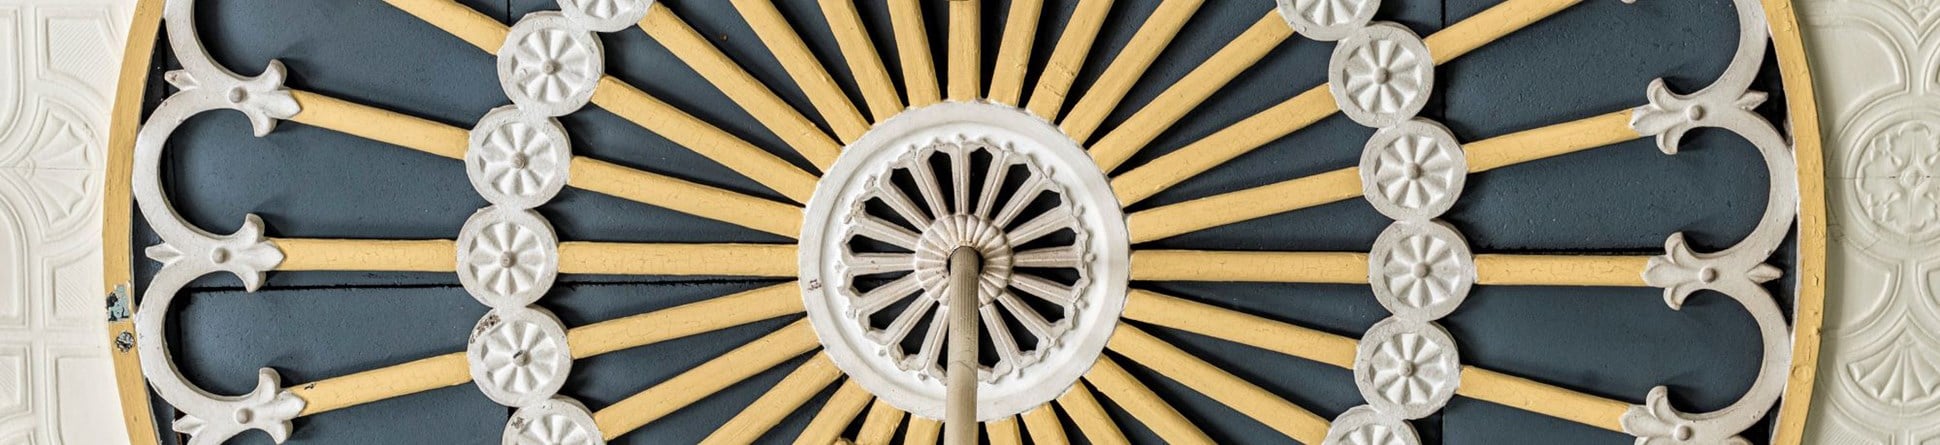 Decorative ceiling rose painted yellow and blue